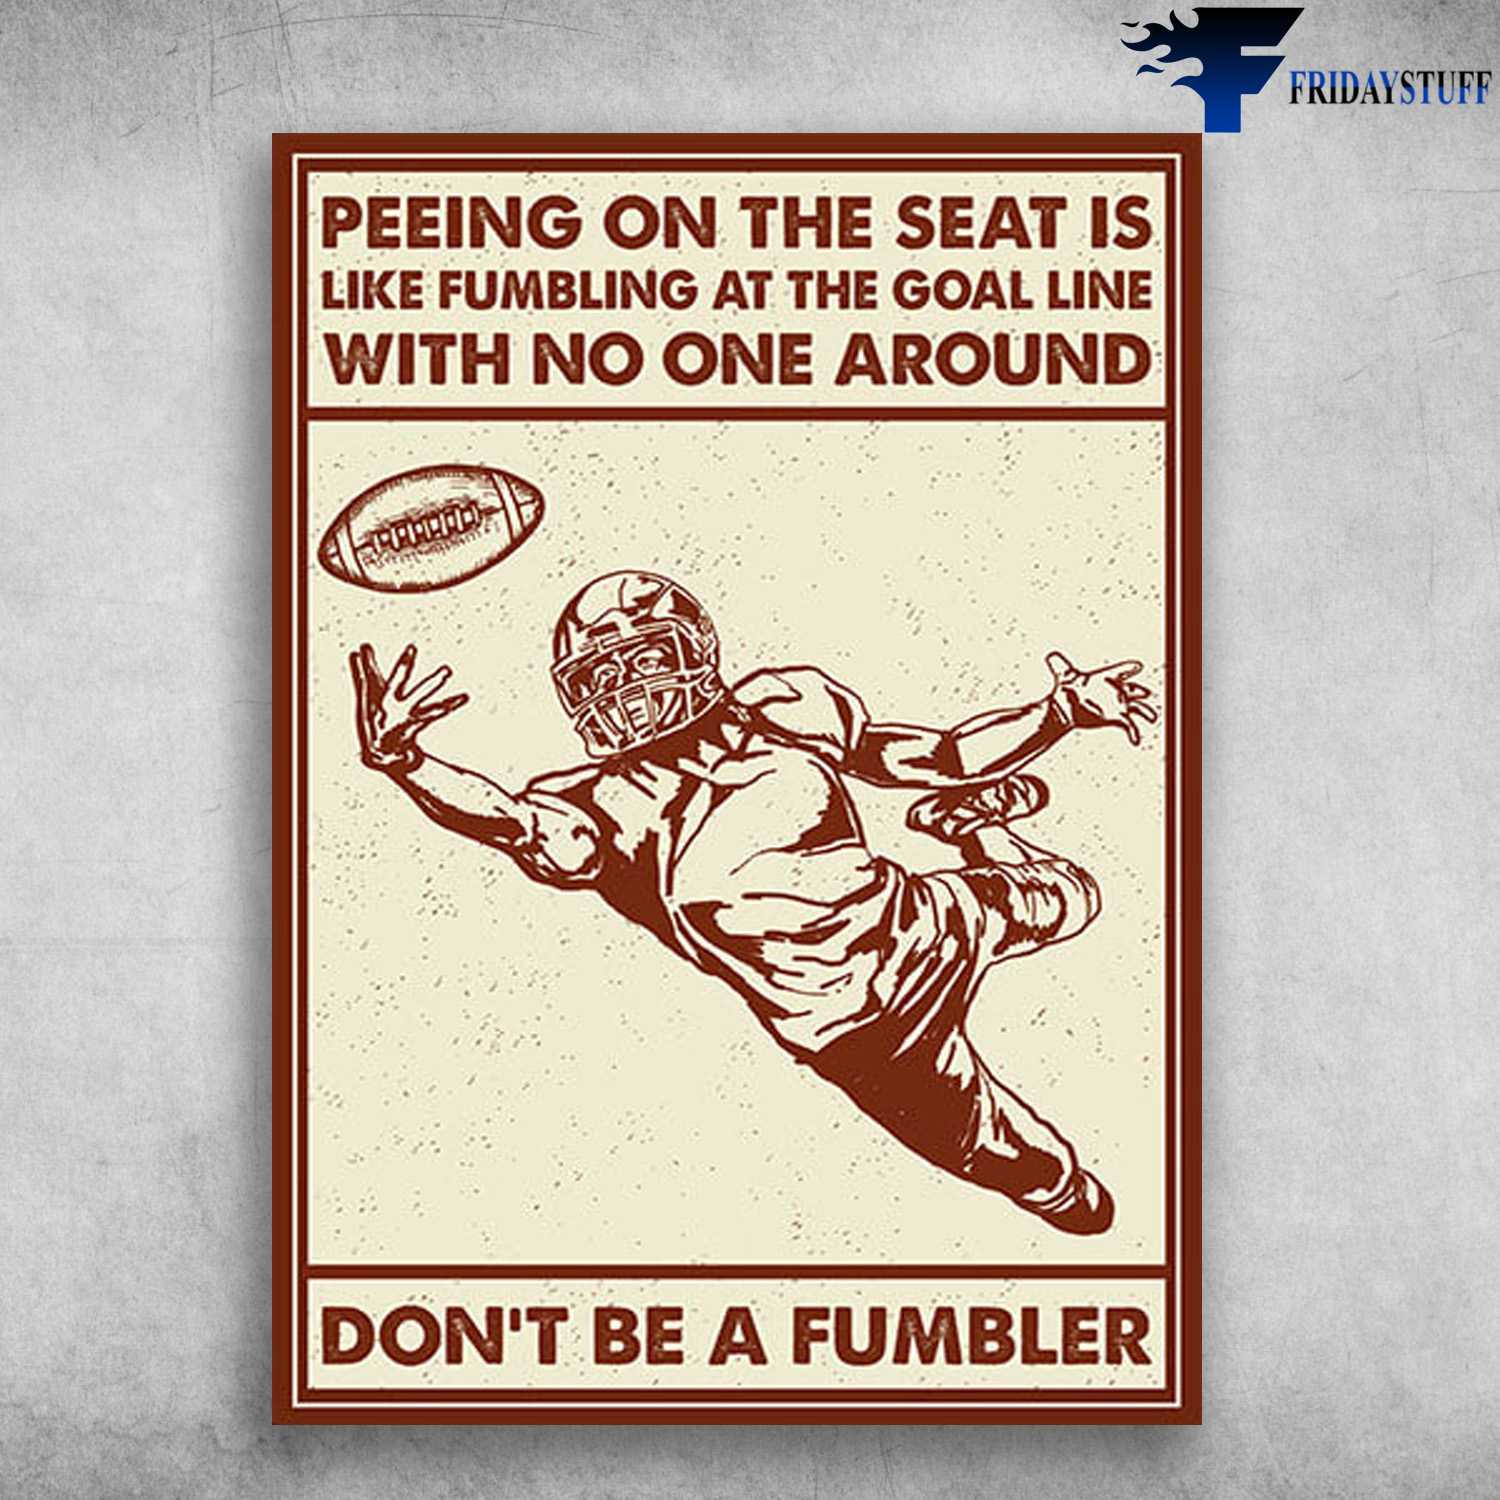 Rugby Player - Peeing On The Seat Is Like Fumbling, At The Goal Line With No One Around, Don't Be A Fumbler